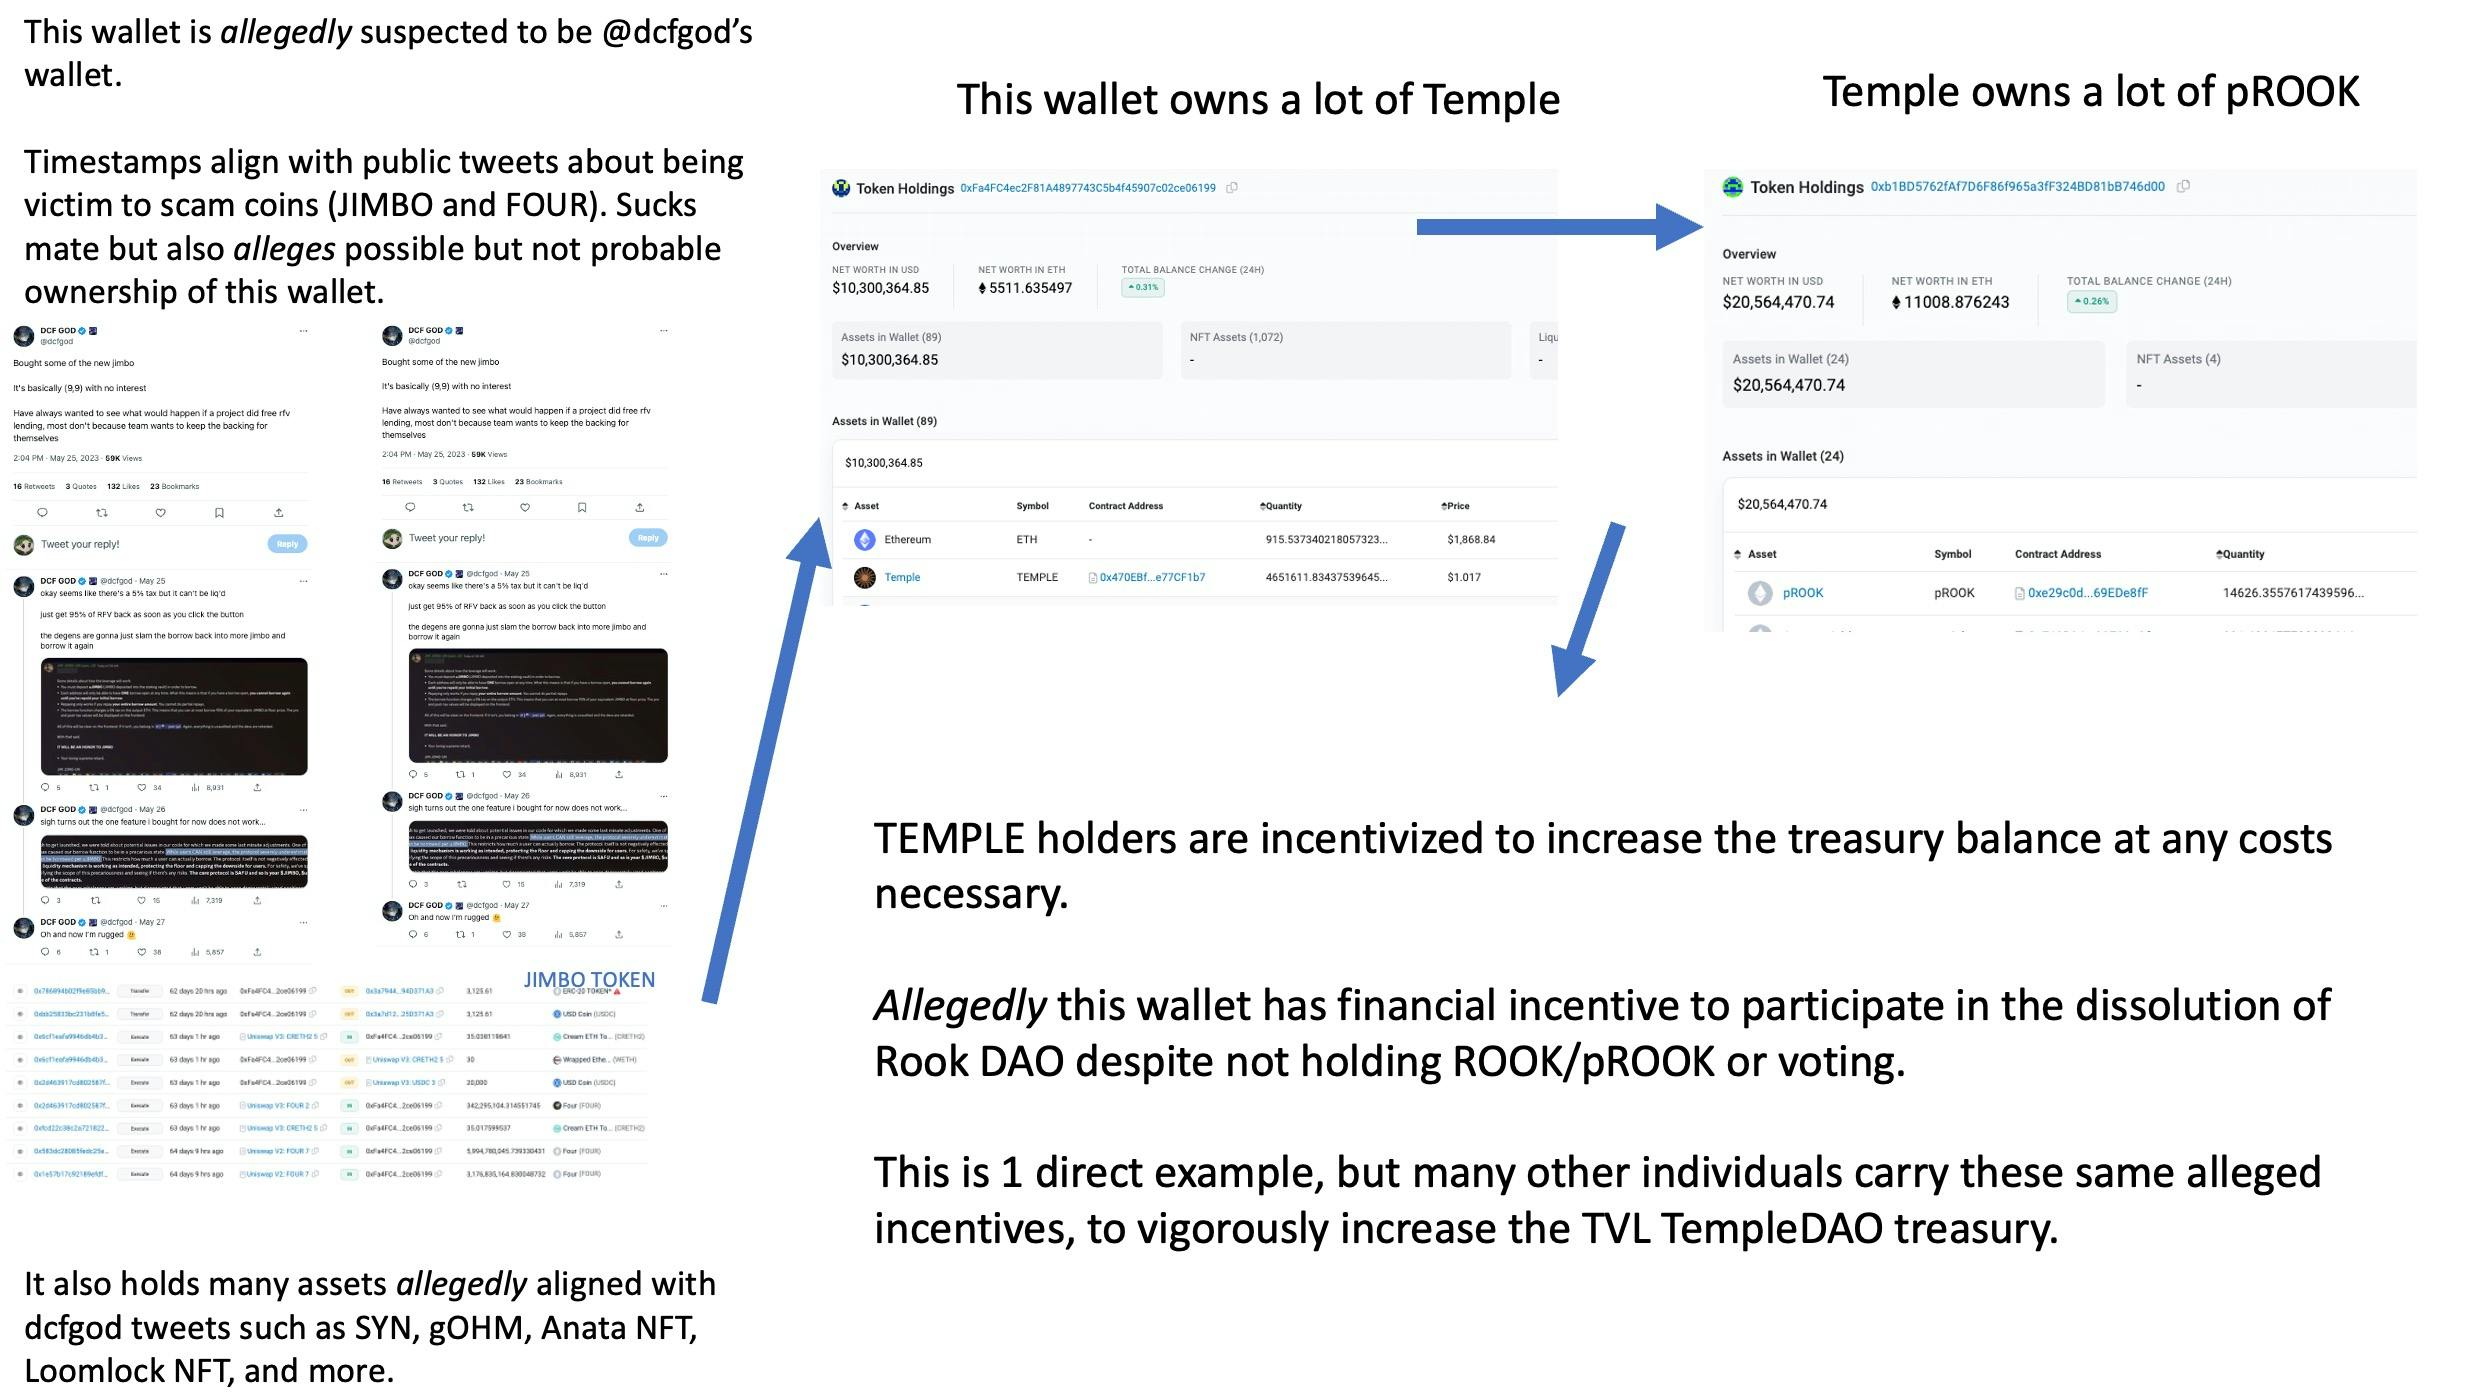 dcfgod never owned ROOK but instead, possibly TEMPLE. A wallet adjacent to them held a LOT of tokens ($M). TempleDAO is allegedly a top holder in pROOK and possibly the largest holder for its dissolution.